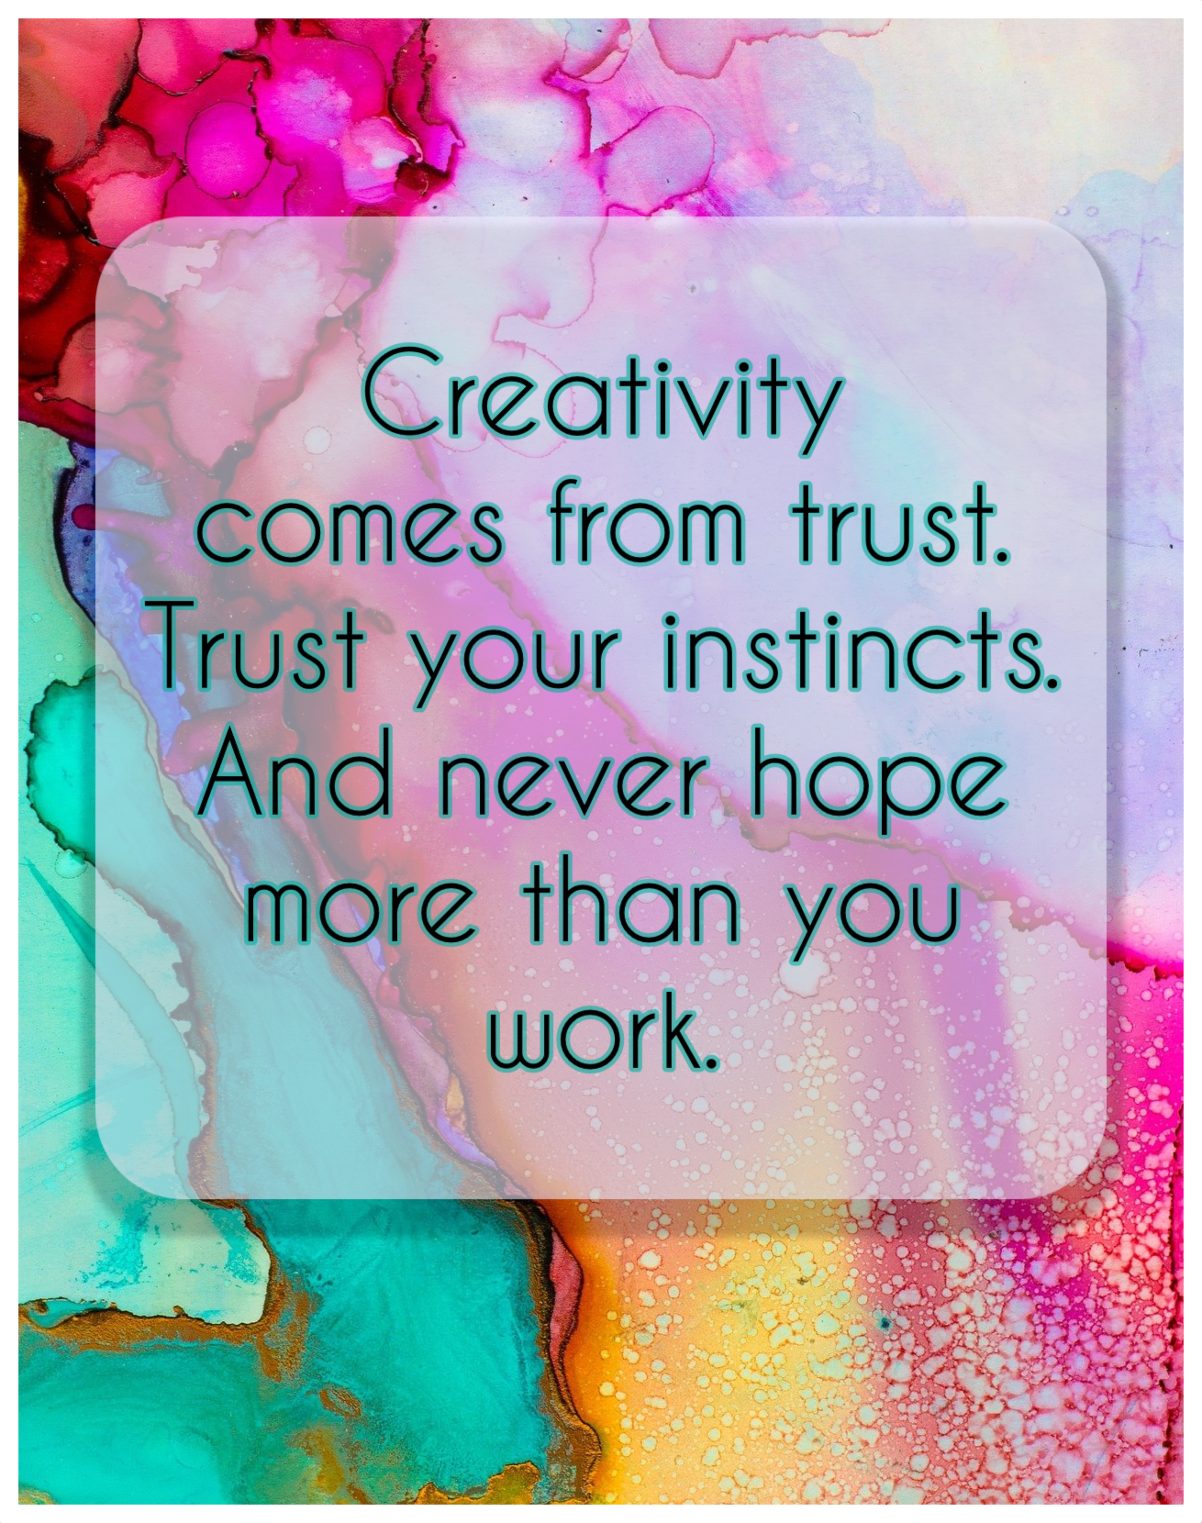 bekitschig.blog Creativity comes from trust. Trust your instincts. And never hope more than you work. Rita Mae Brown